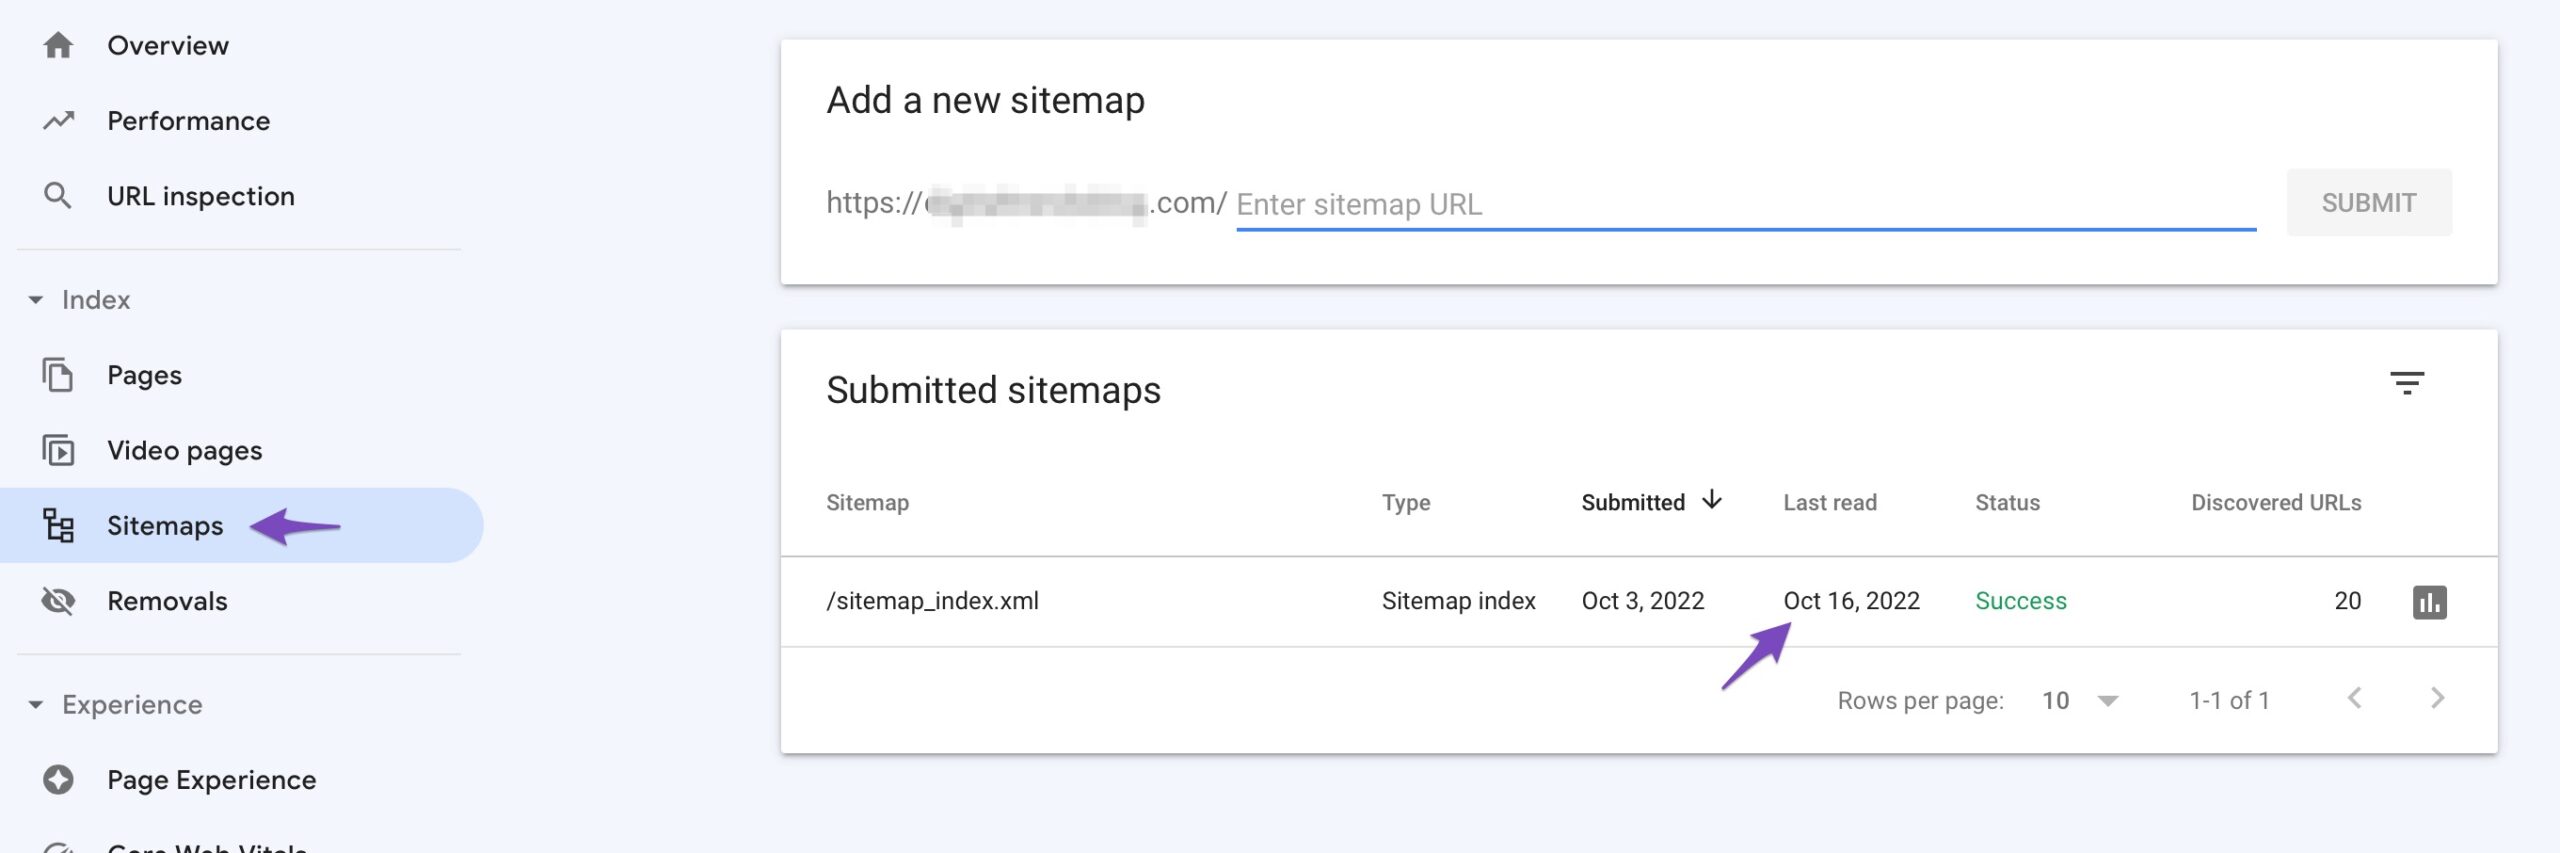 Sitemap index - Search Console Help